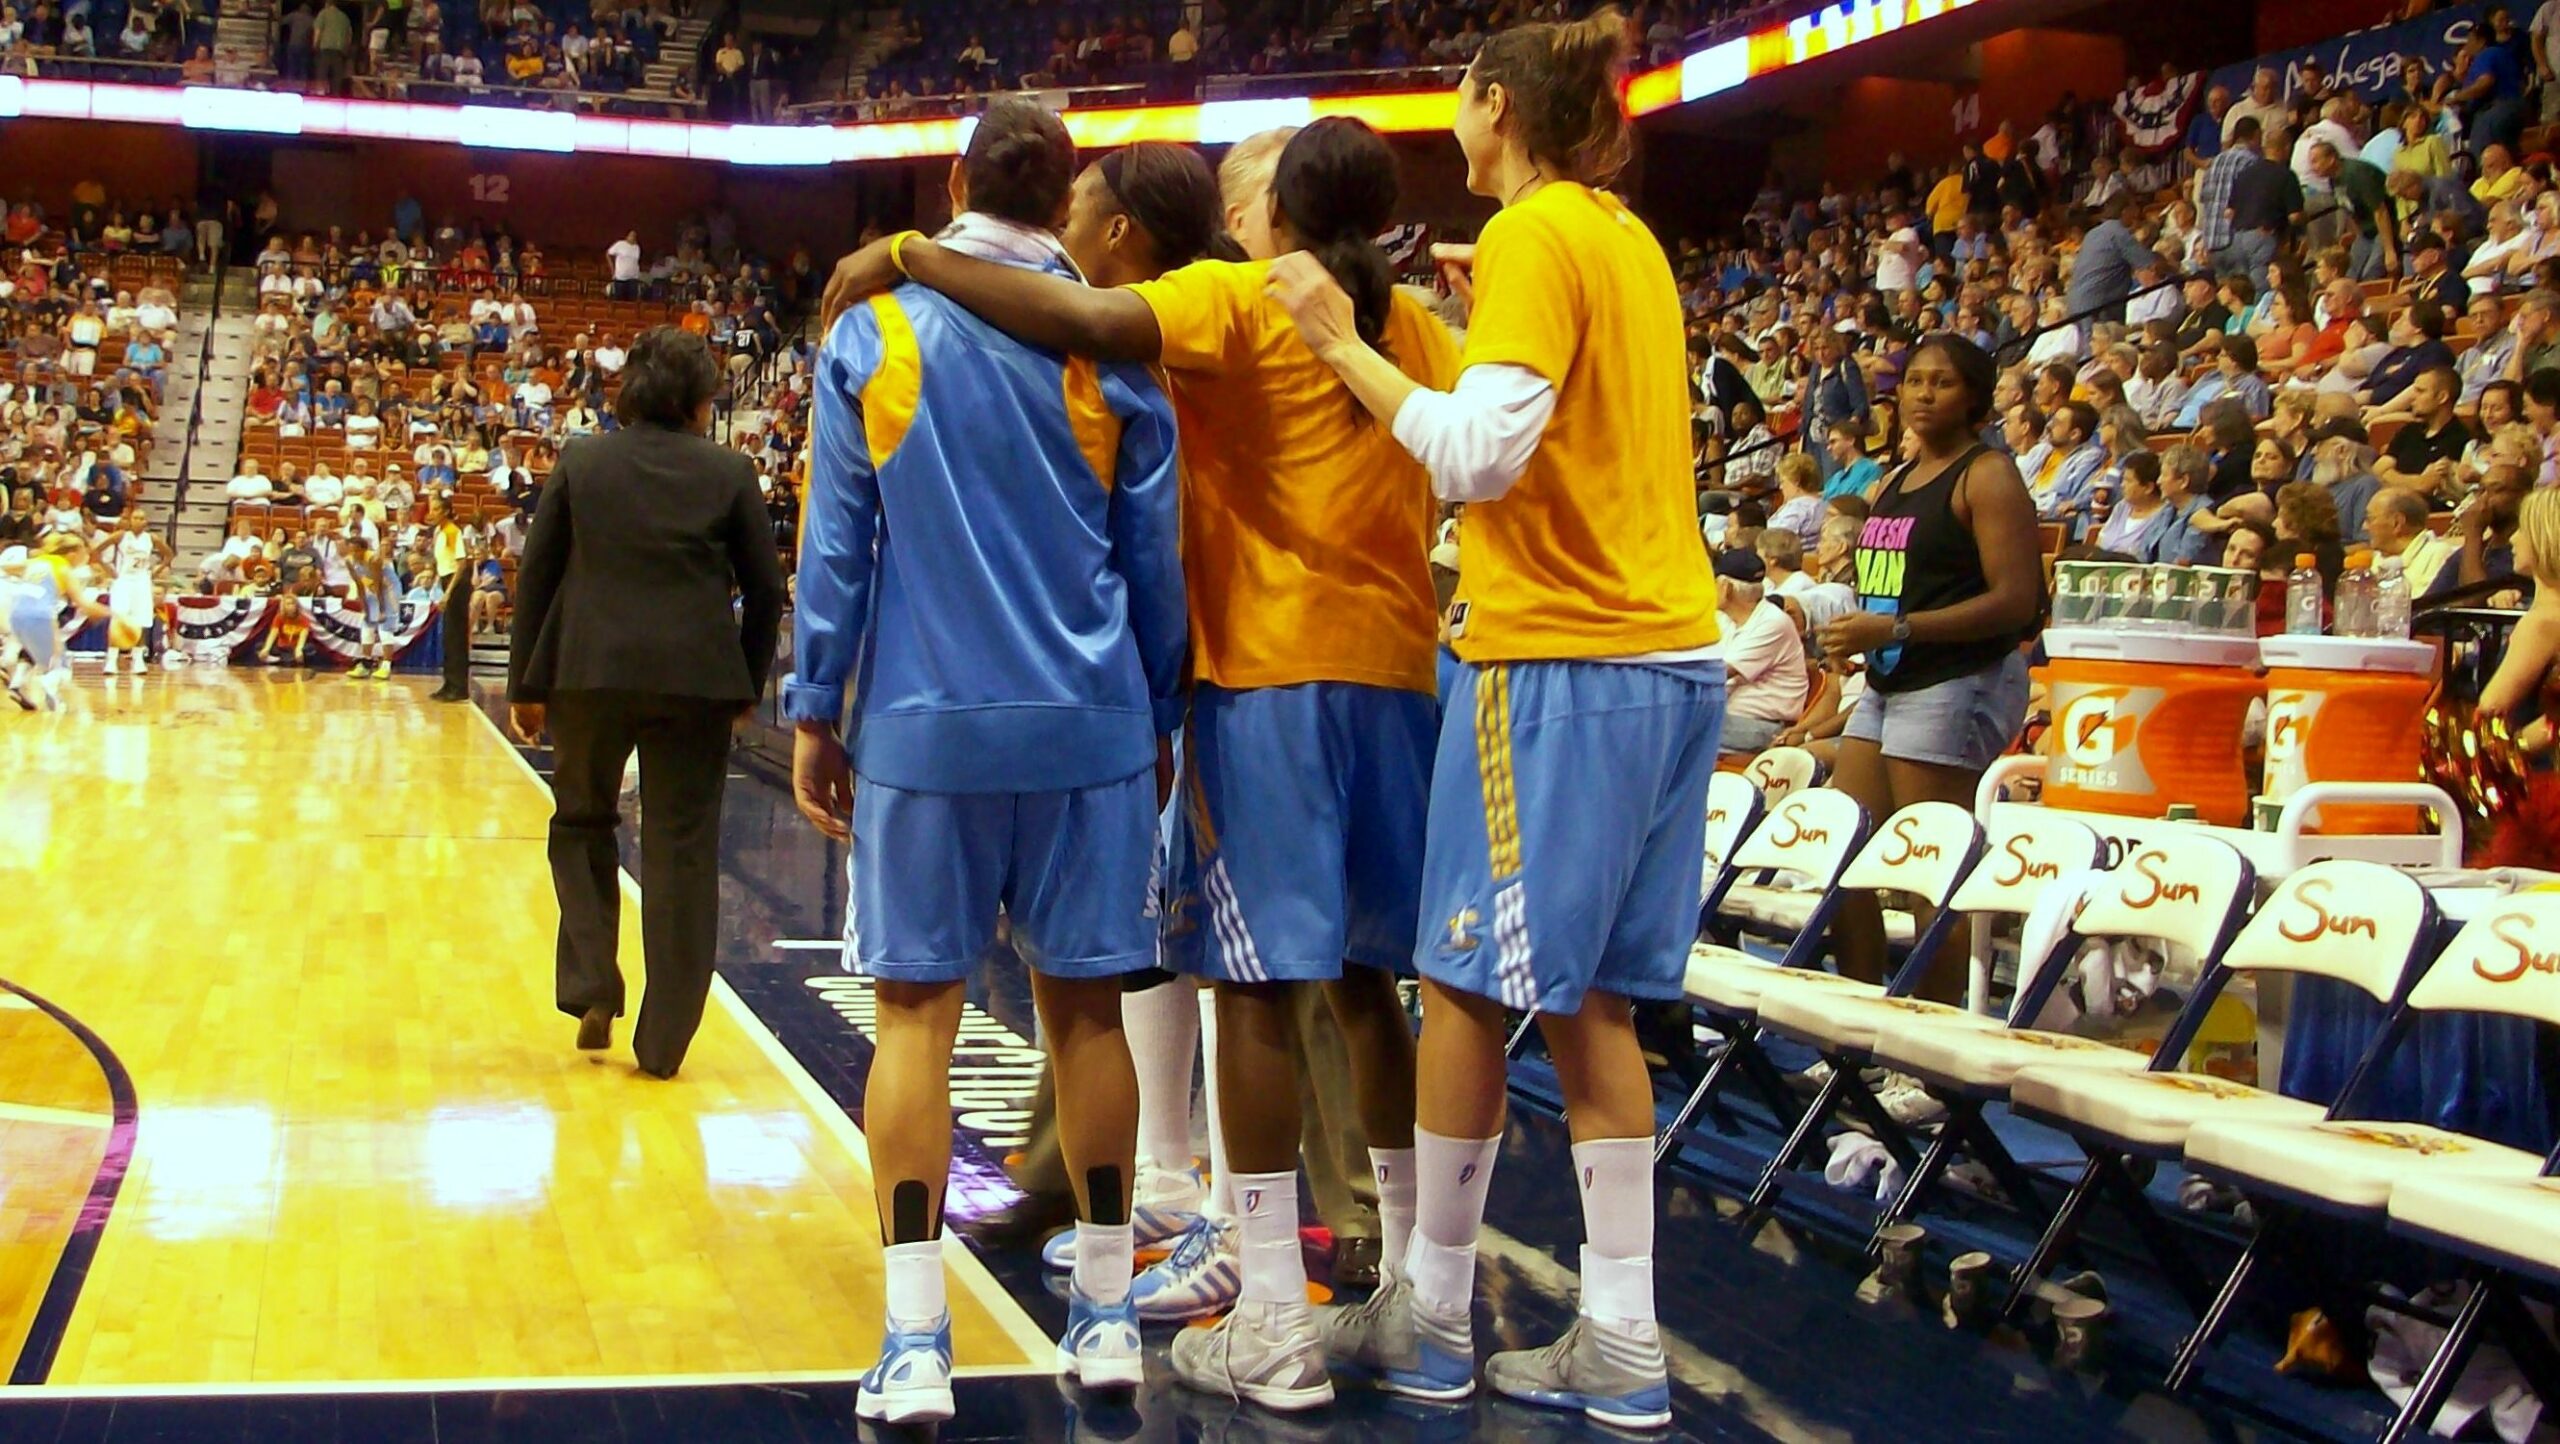 After “the streak” Chicago Sky aims for elusive first playoff berth behind mix of veterans and youth